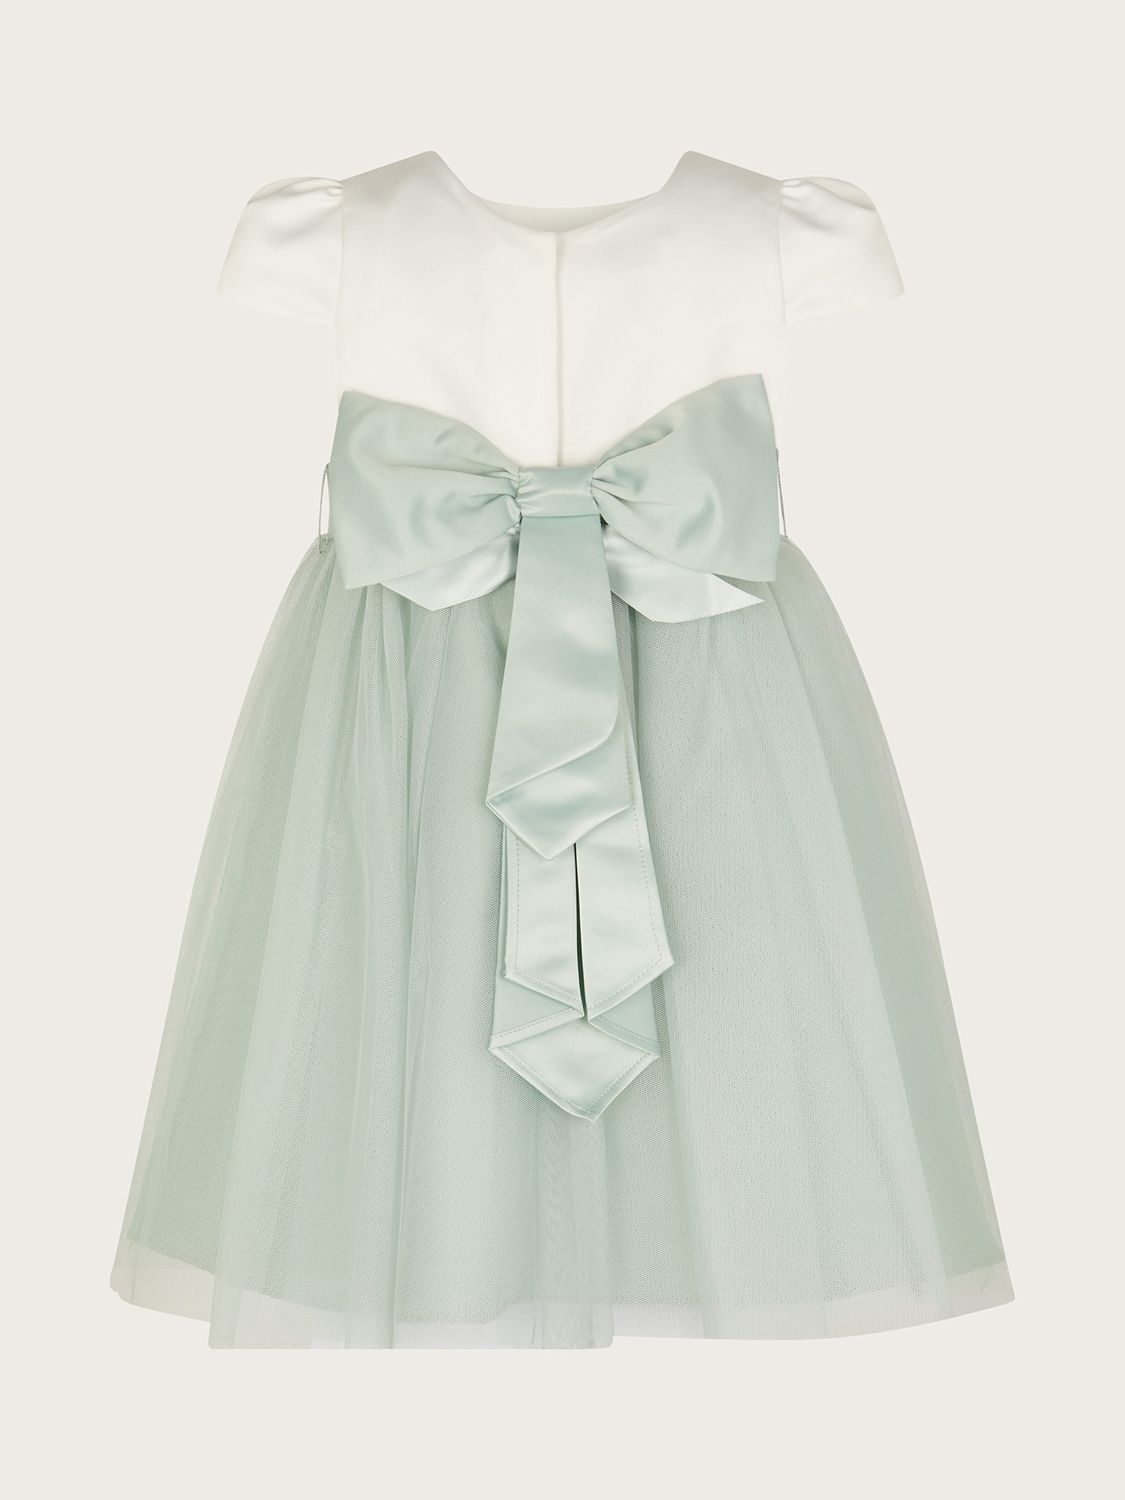 Monsoon Baby Tulle Bridesmaid Dress, Green, 18-24 months